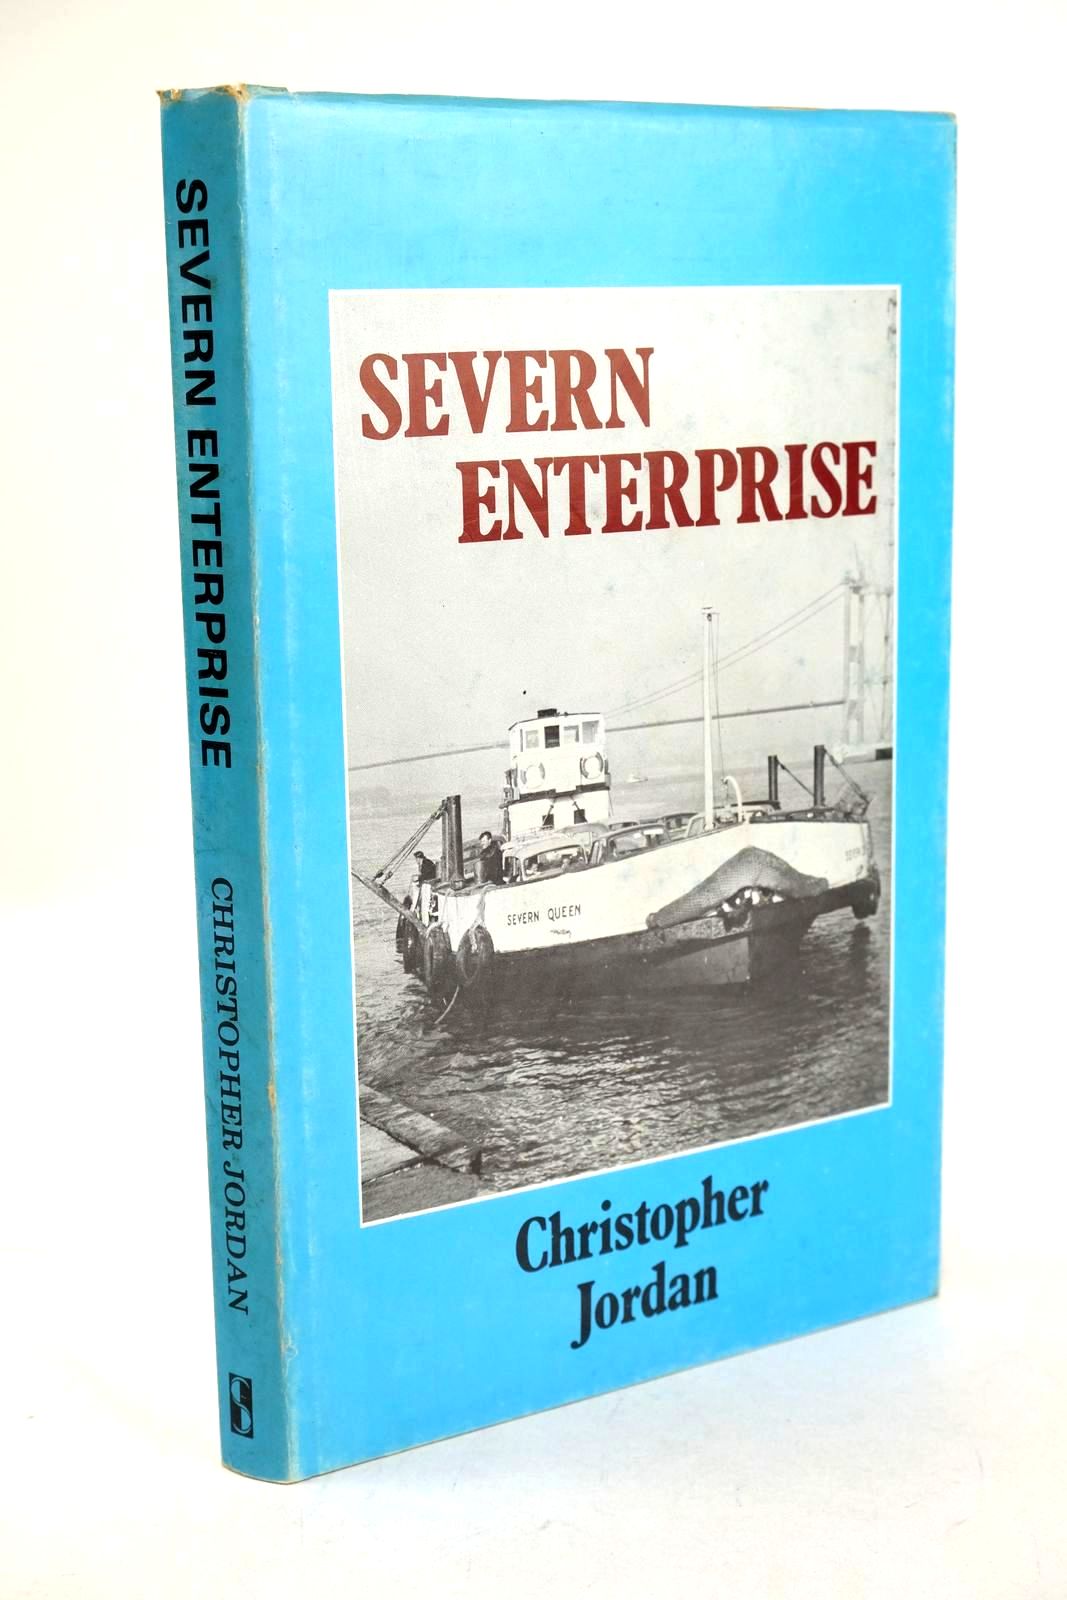 Severn Enterprise: The Story of Old and New Passenger Ferries